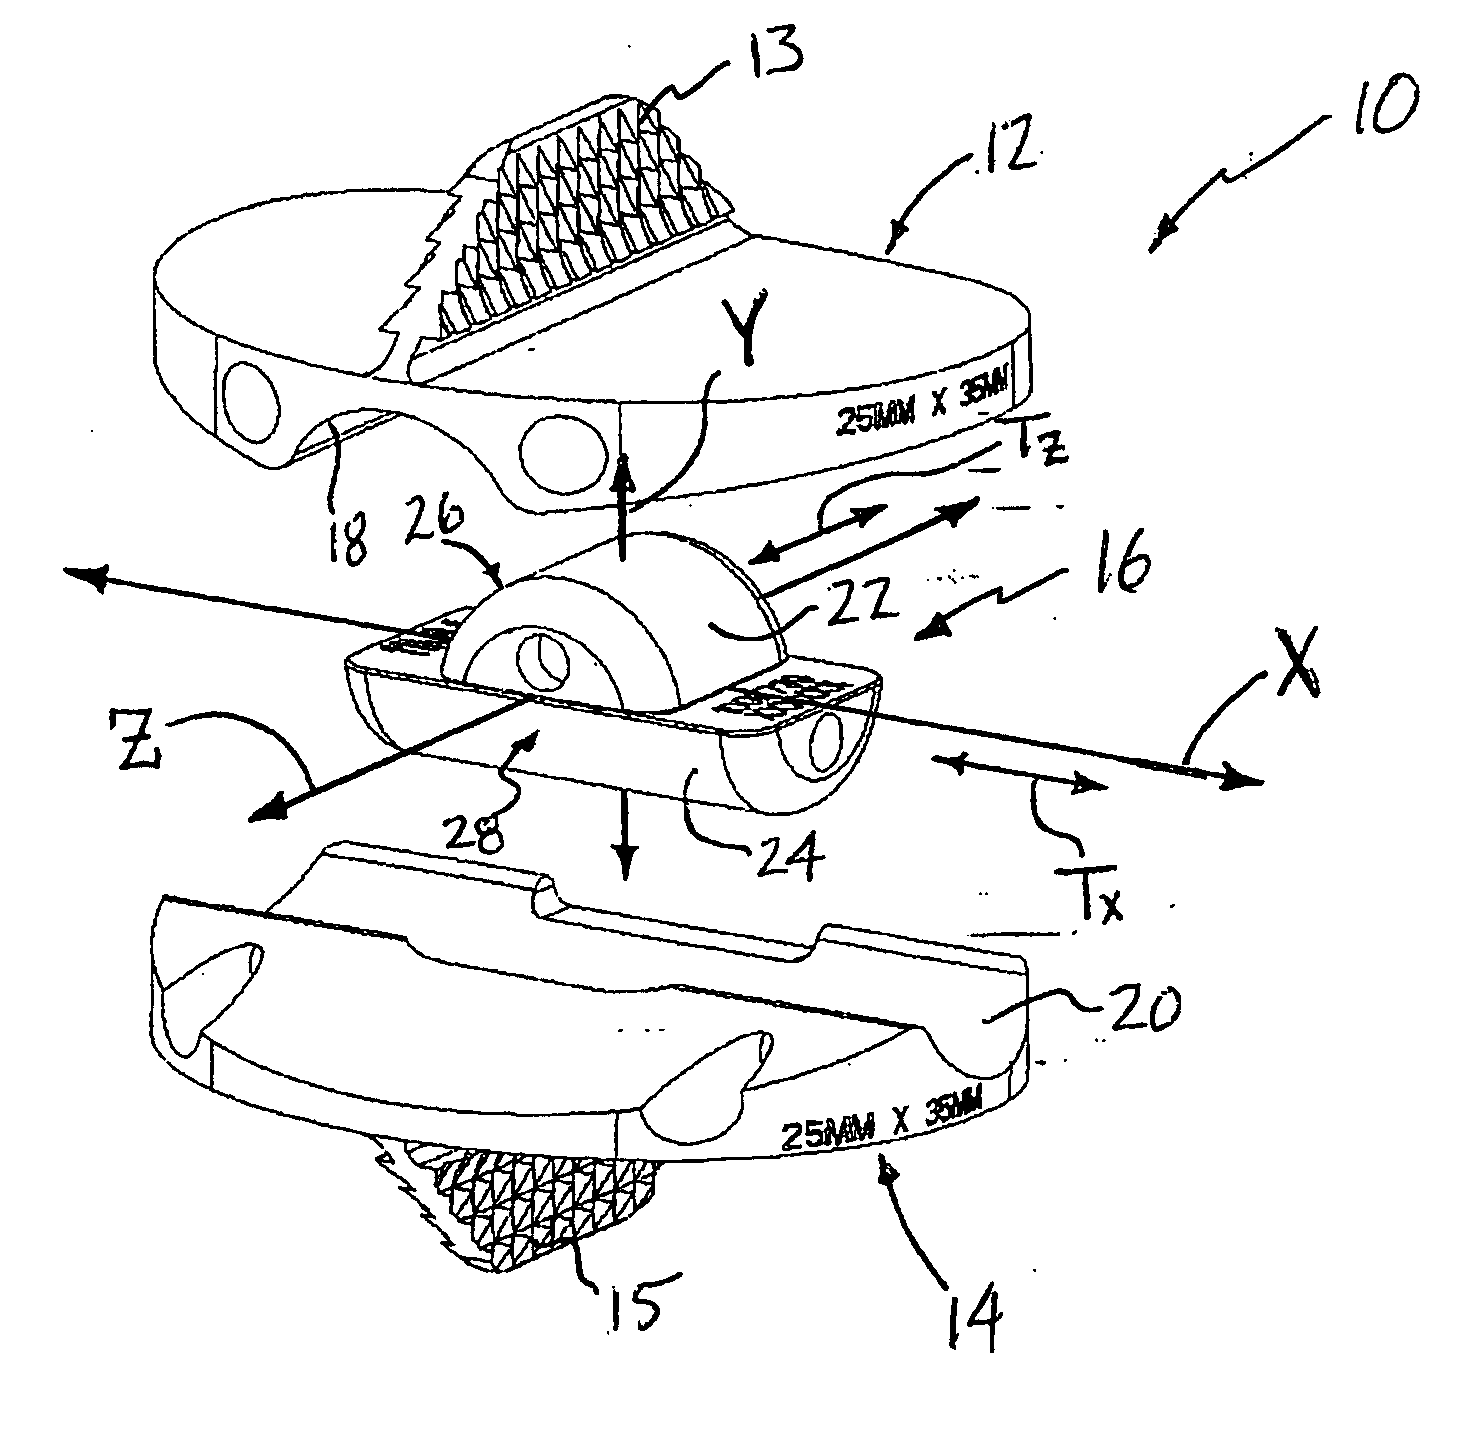 Total disc replacement system and related methods